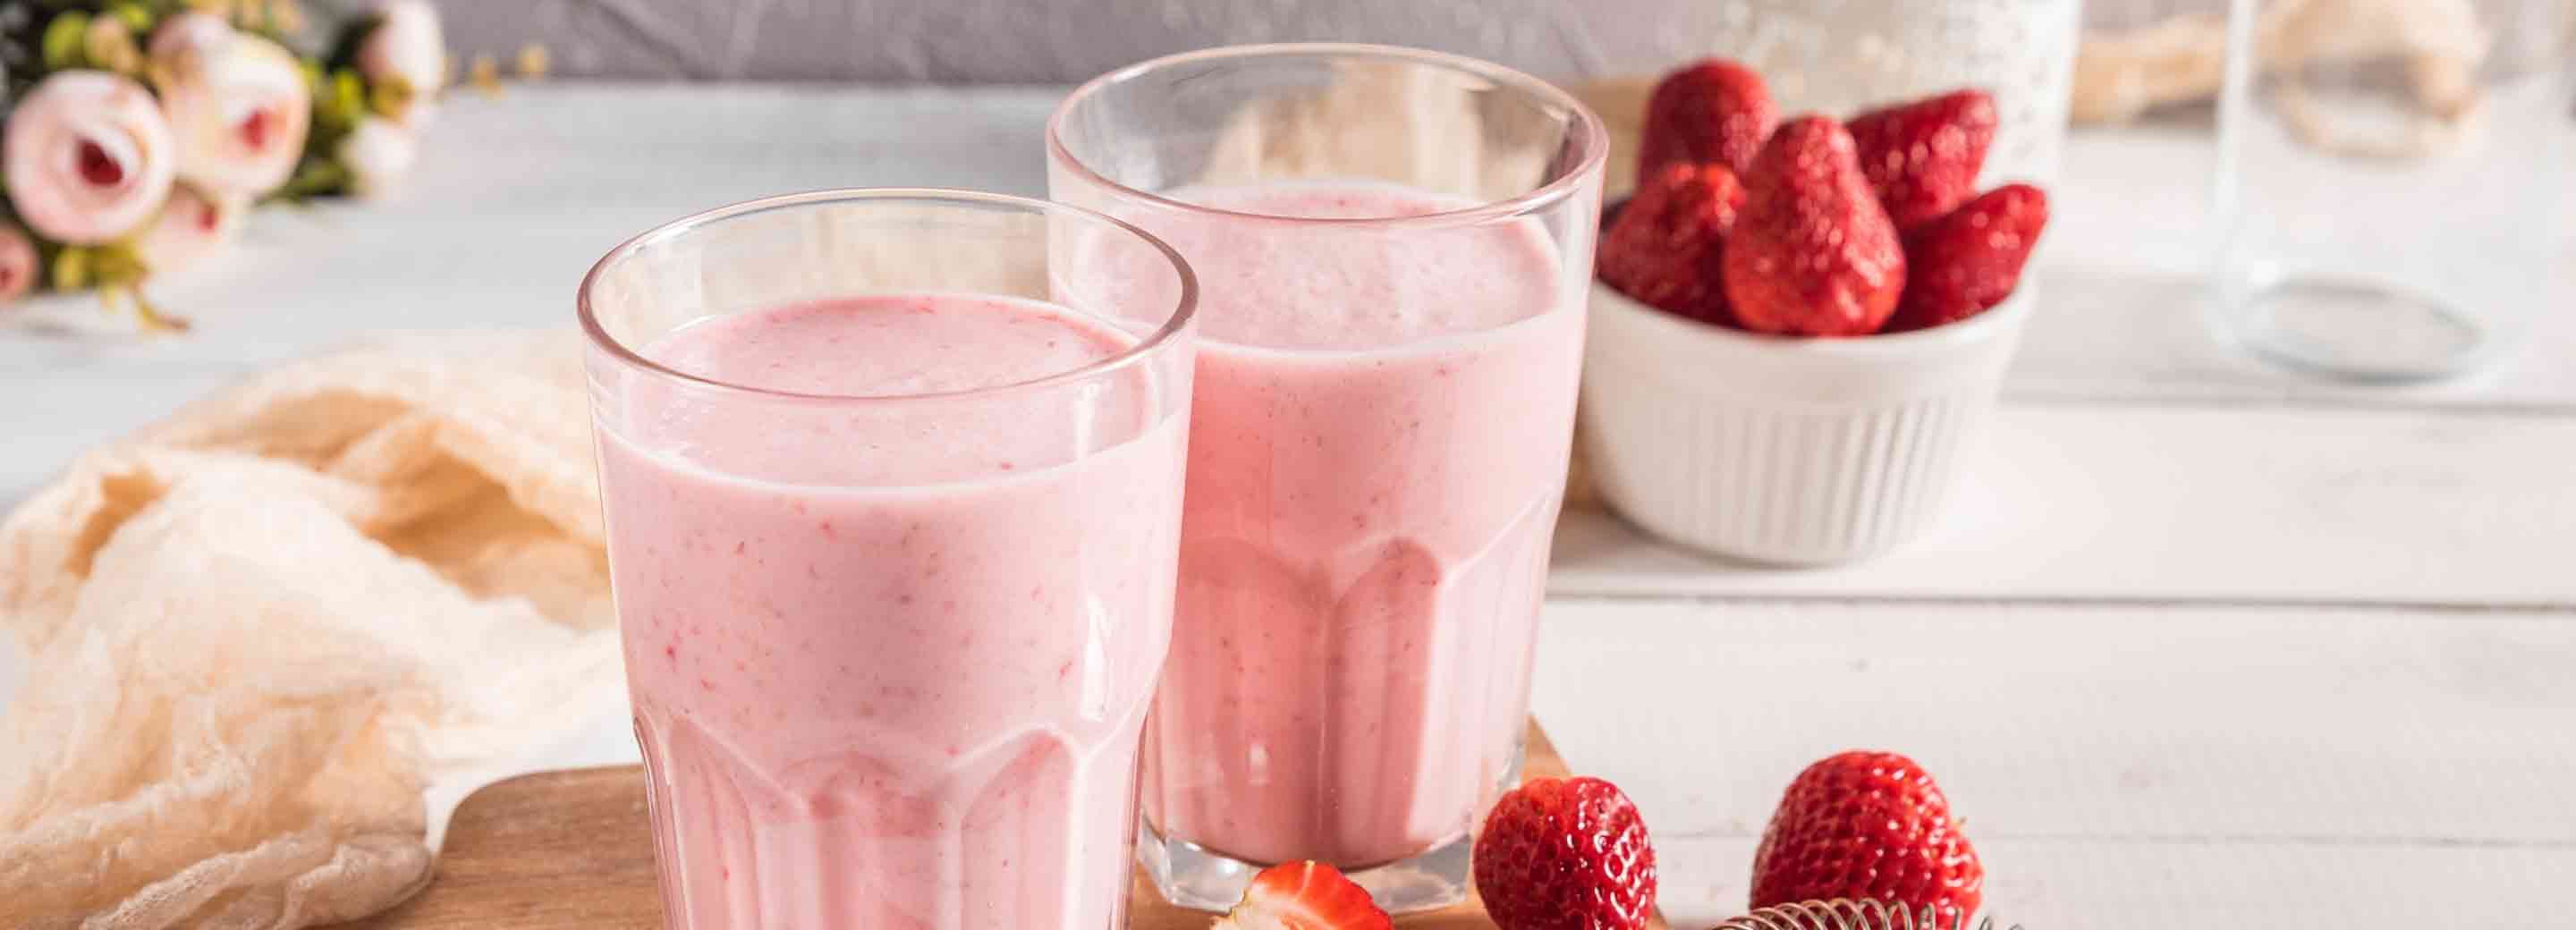 Strawberry Short Cuts Smoothie